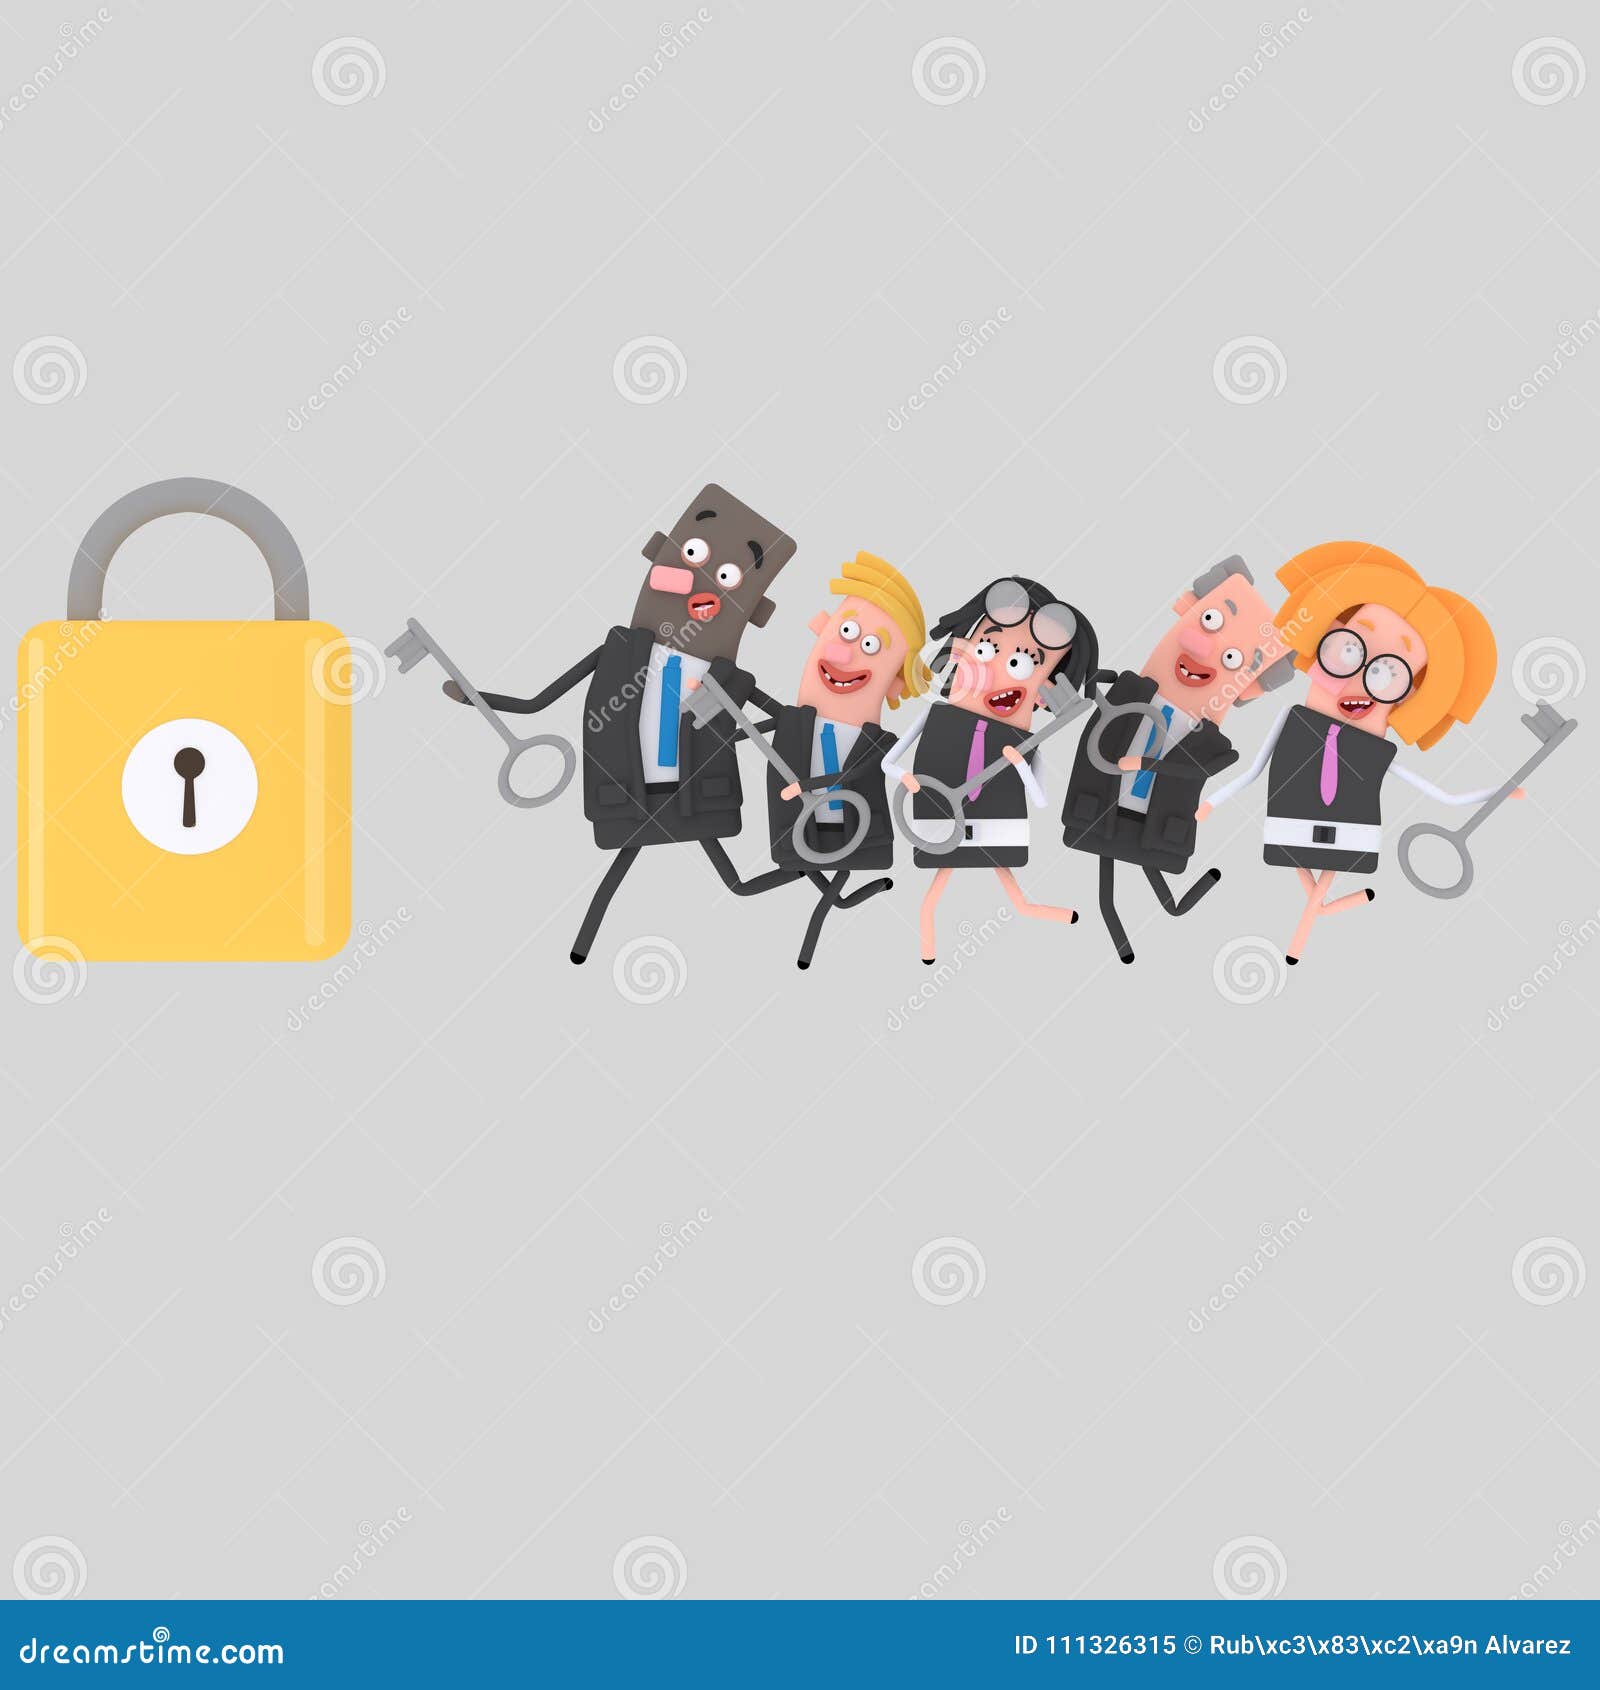 Business People Running To Opening a Padlock. 3D Stock Illustration